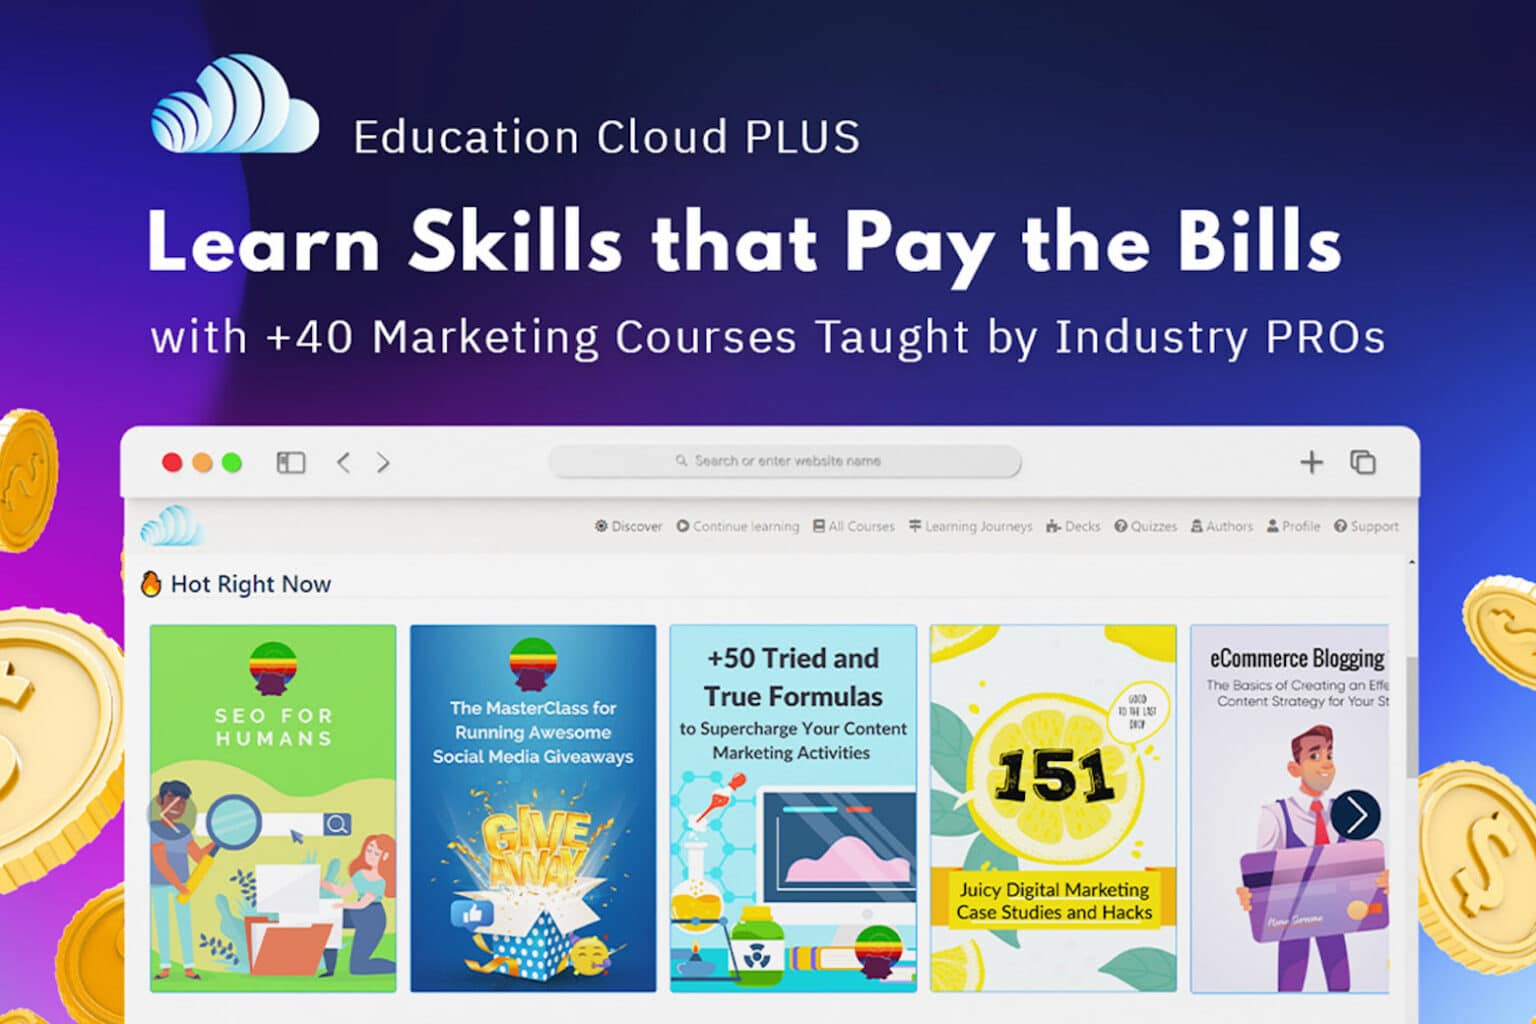 Get access to expert SEO and digital marketing courses for less than $40.